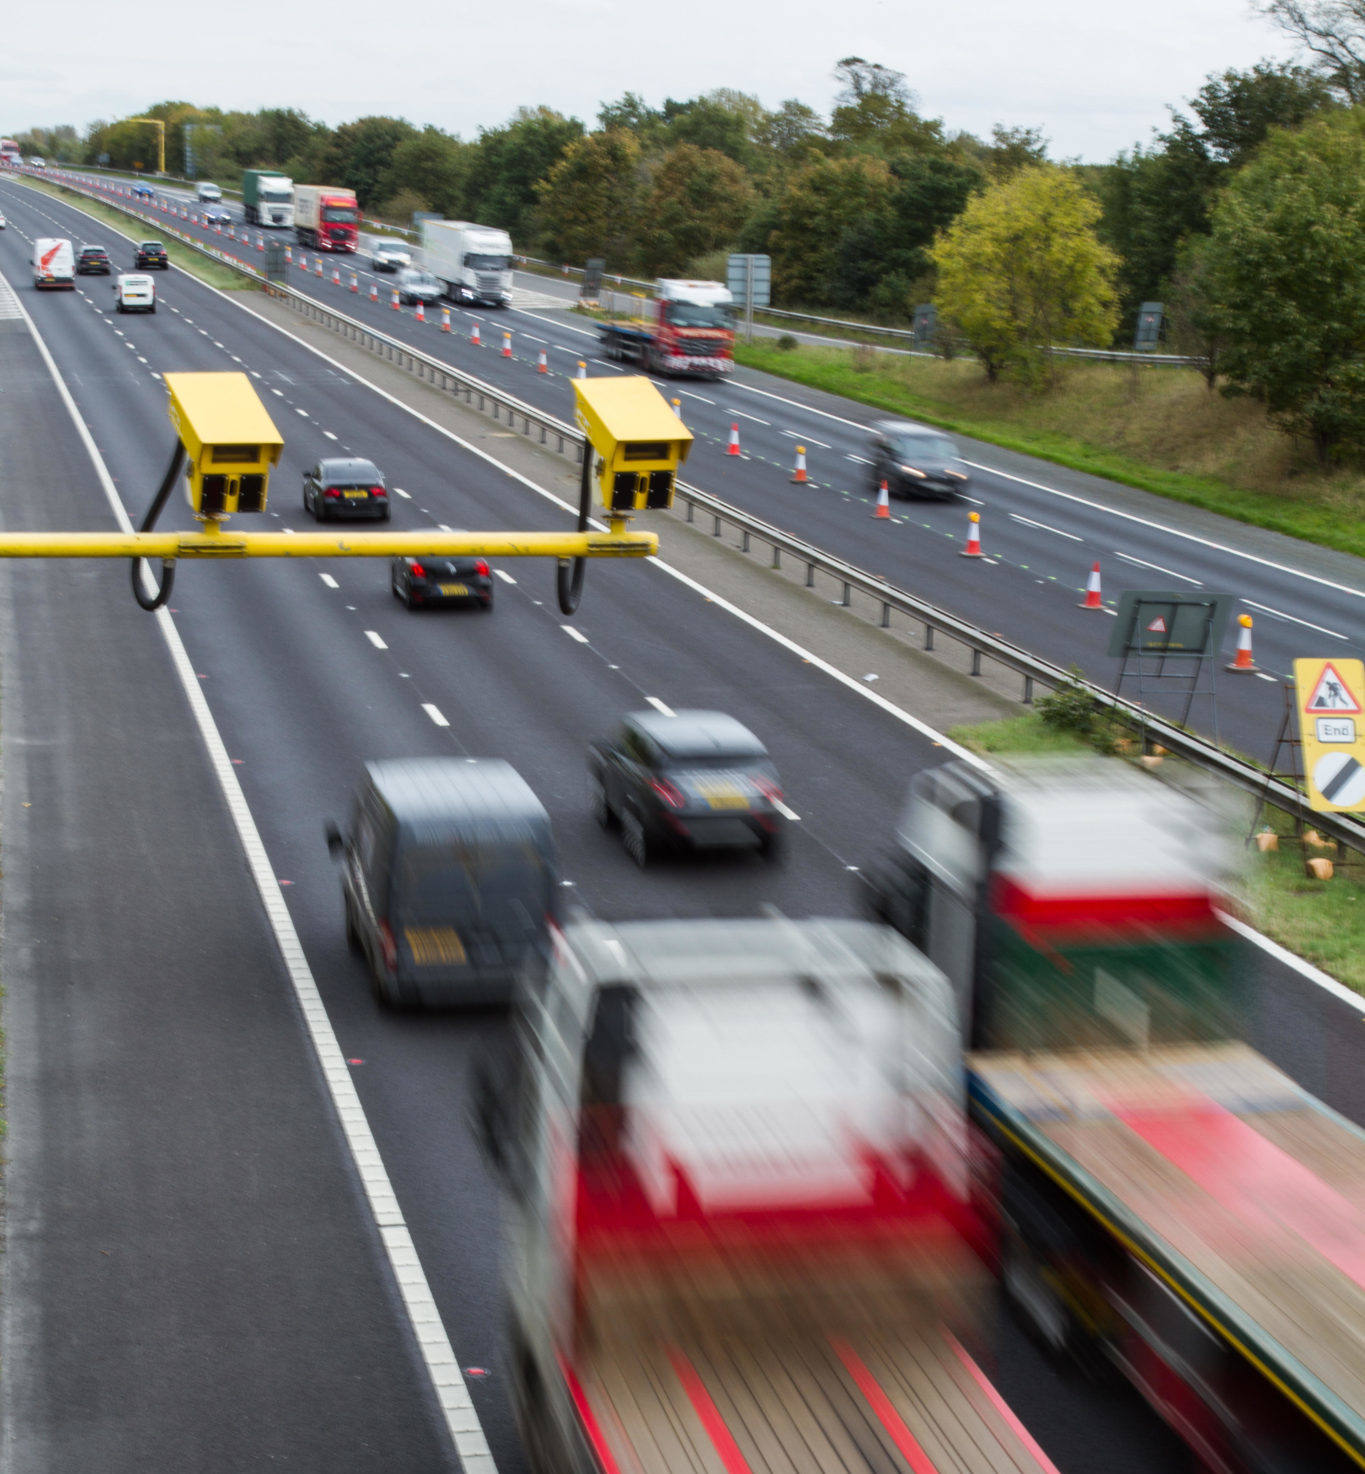 Speed cameras in an average speed check area are seen on a motorway in Britain in October 2017.